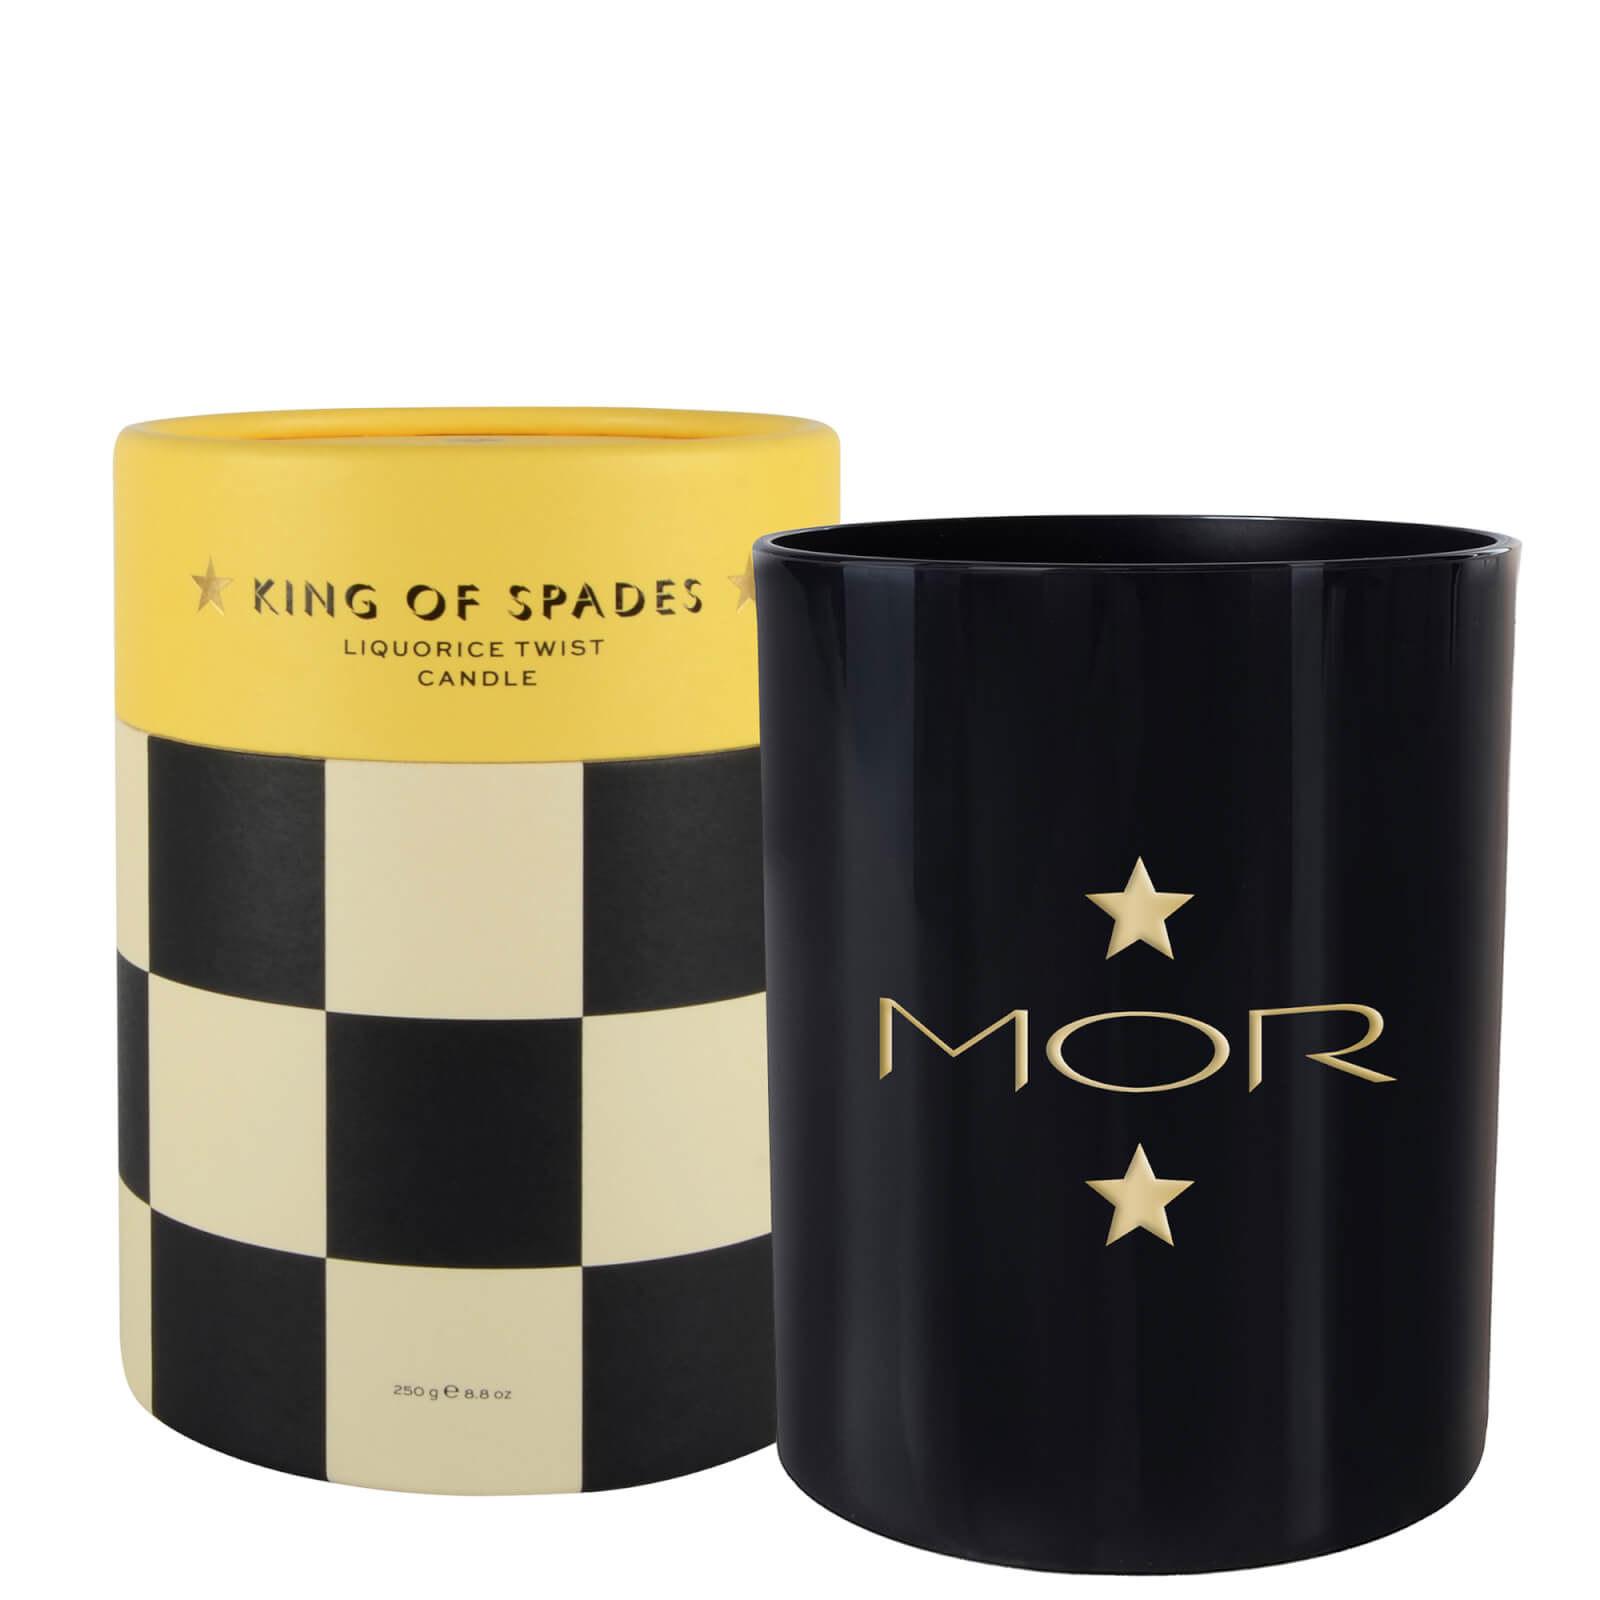 MOR King of Spades Liquorice Twist Candle 250g